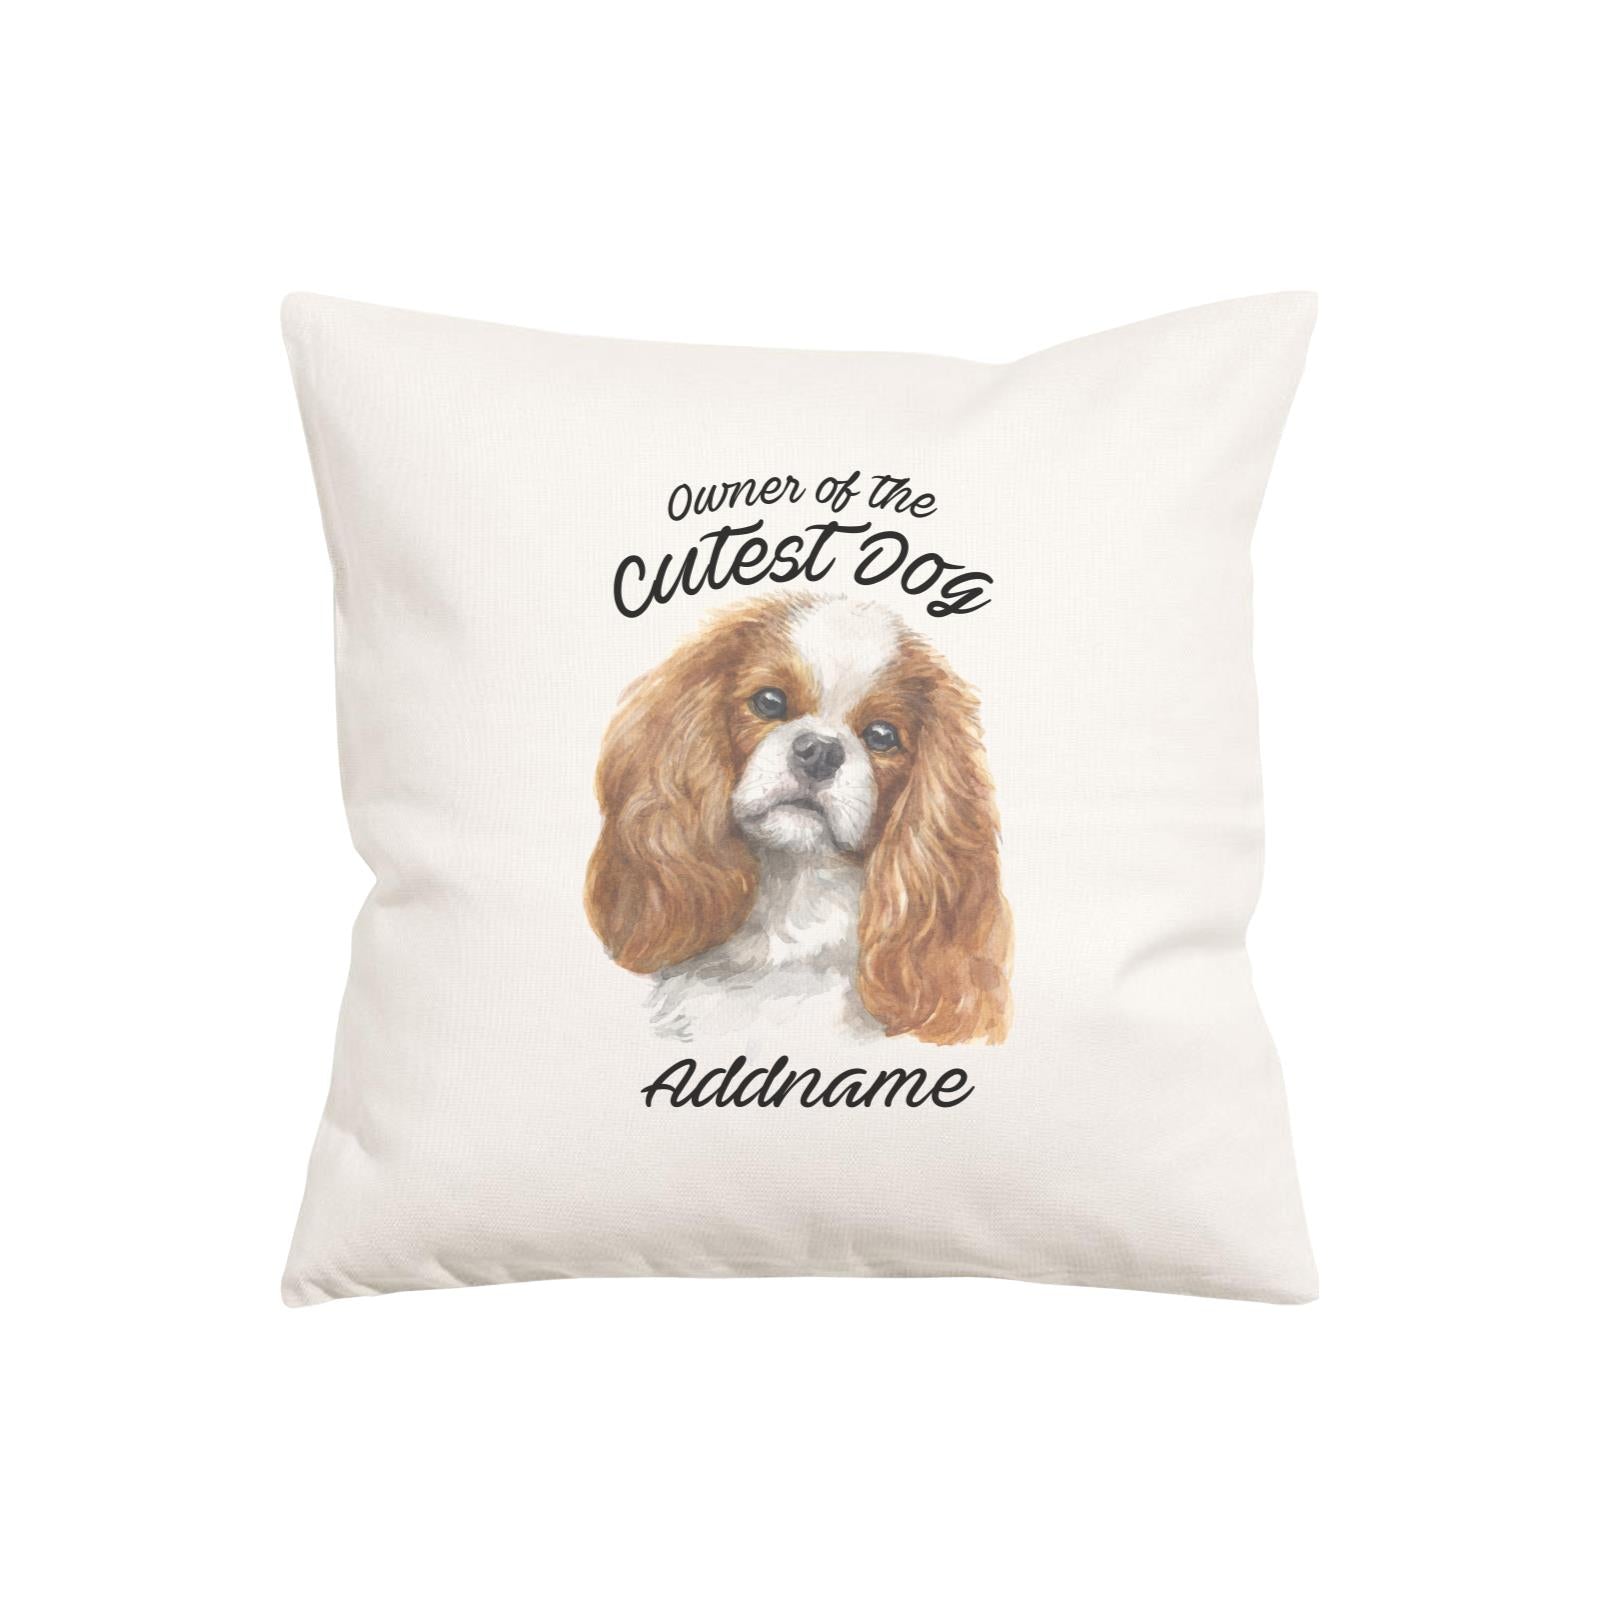 Watercolor Dog Owner Of The Cutest Dog King Charles Spaniel Curly Addname Pillow Cushion